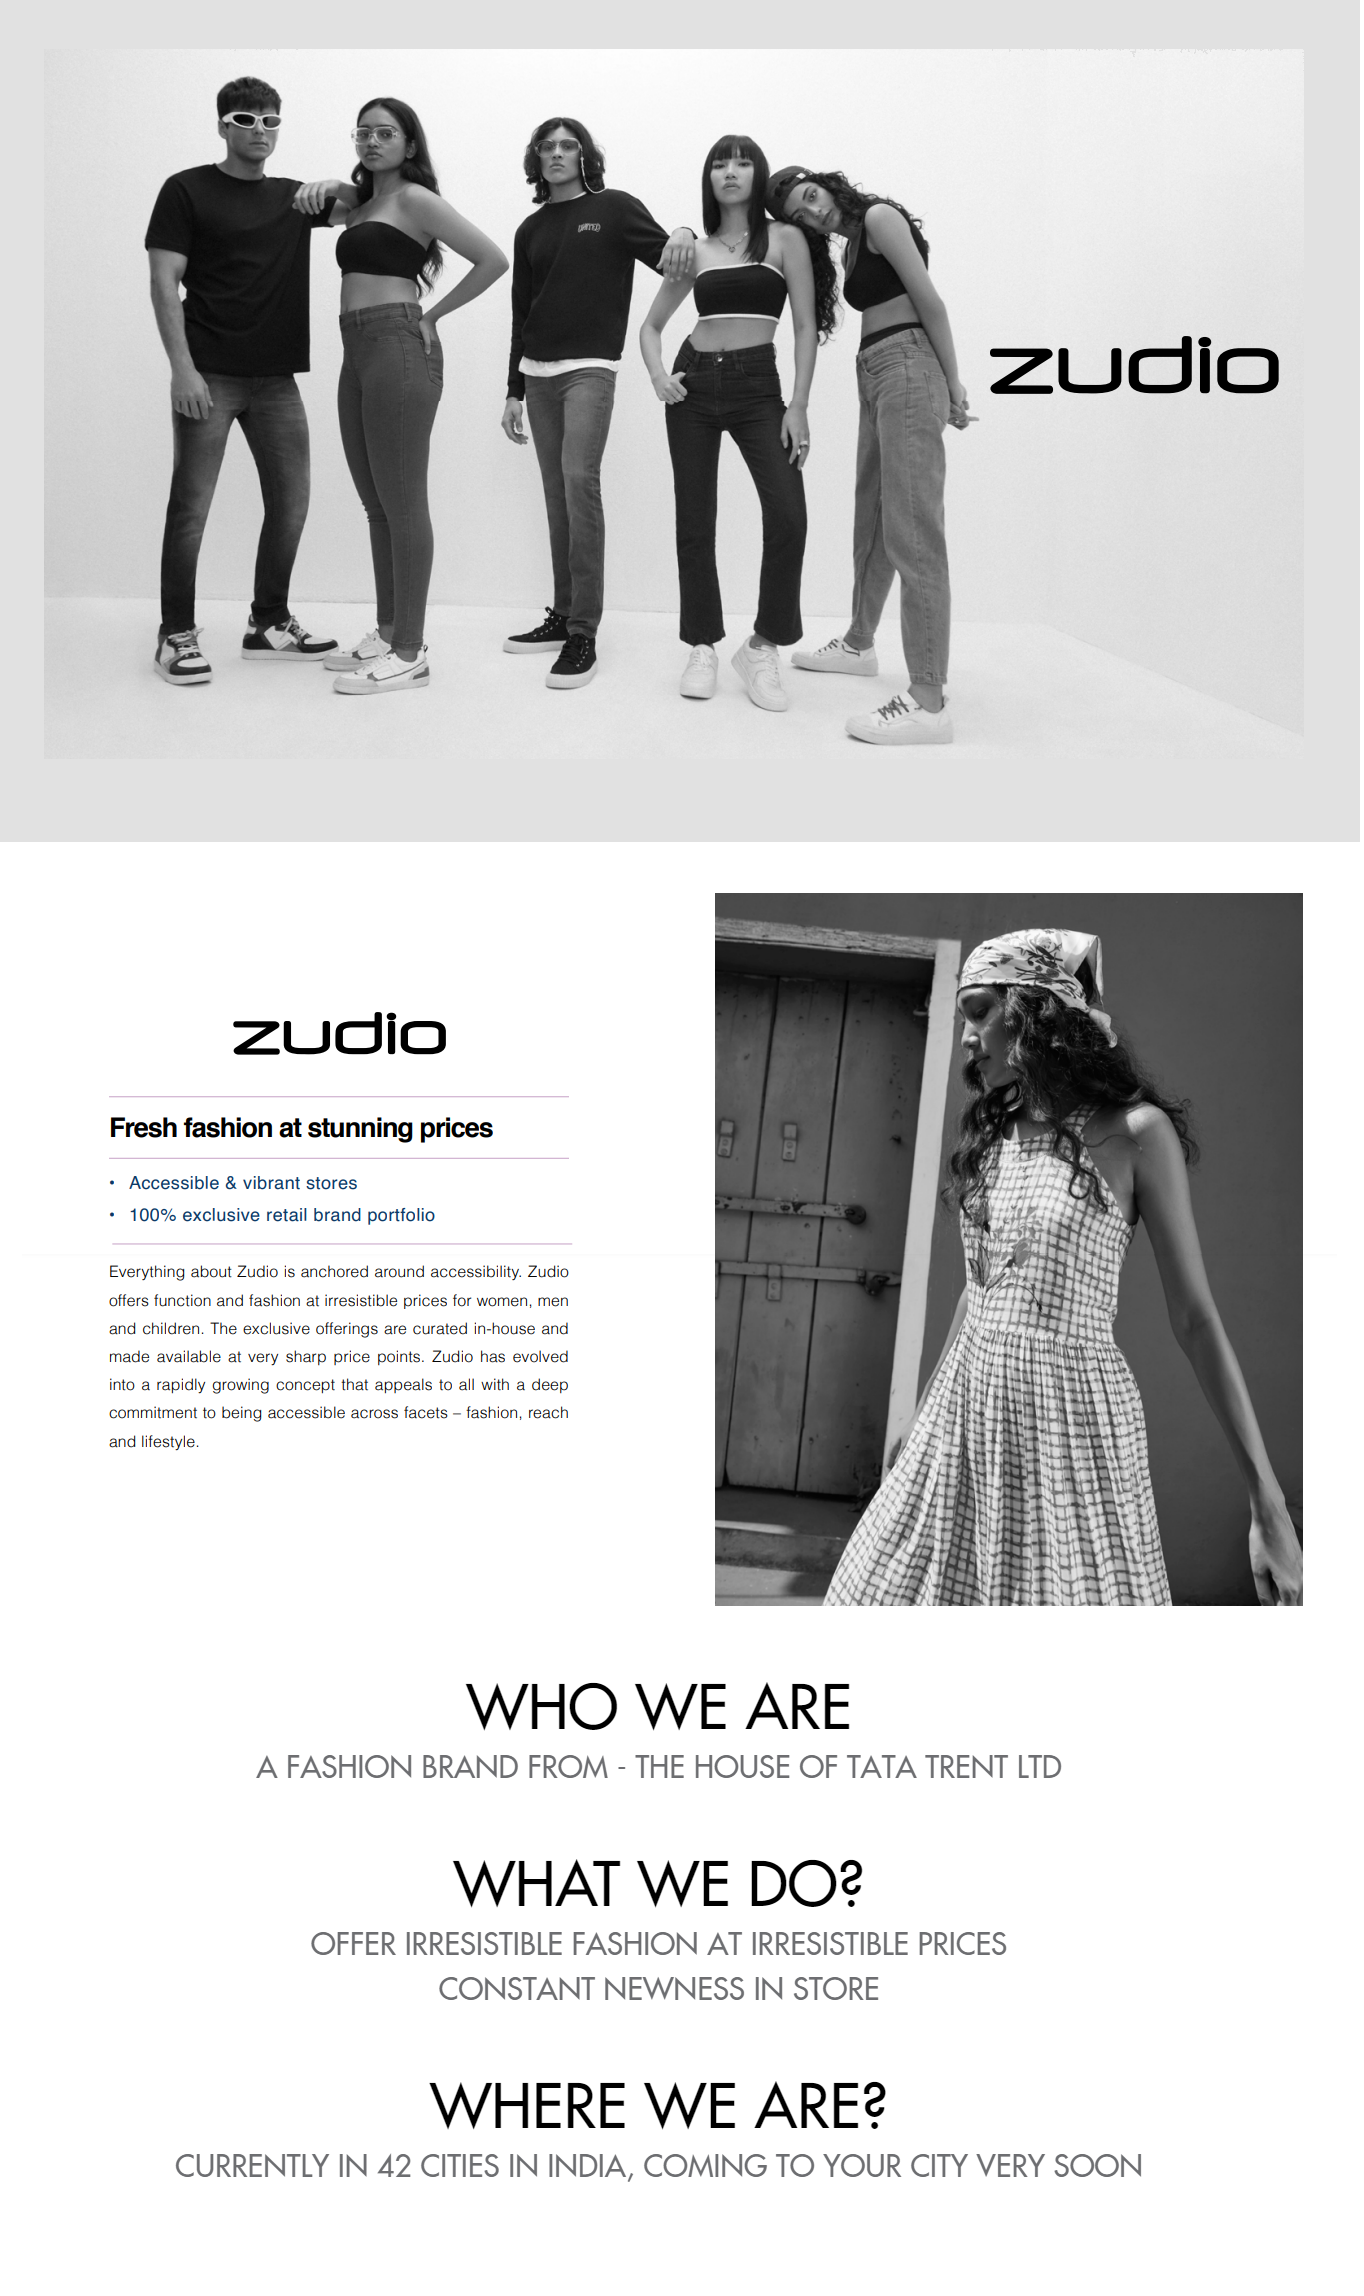 Zudio Franchise Cost, How to Get, Contact, Fee